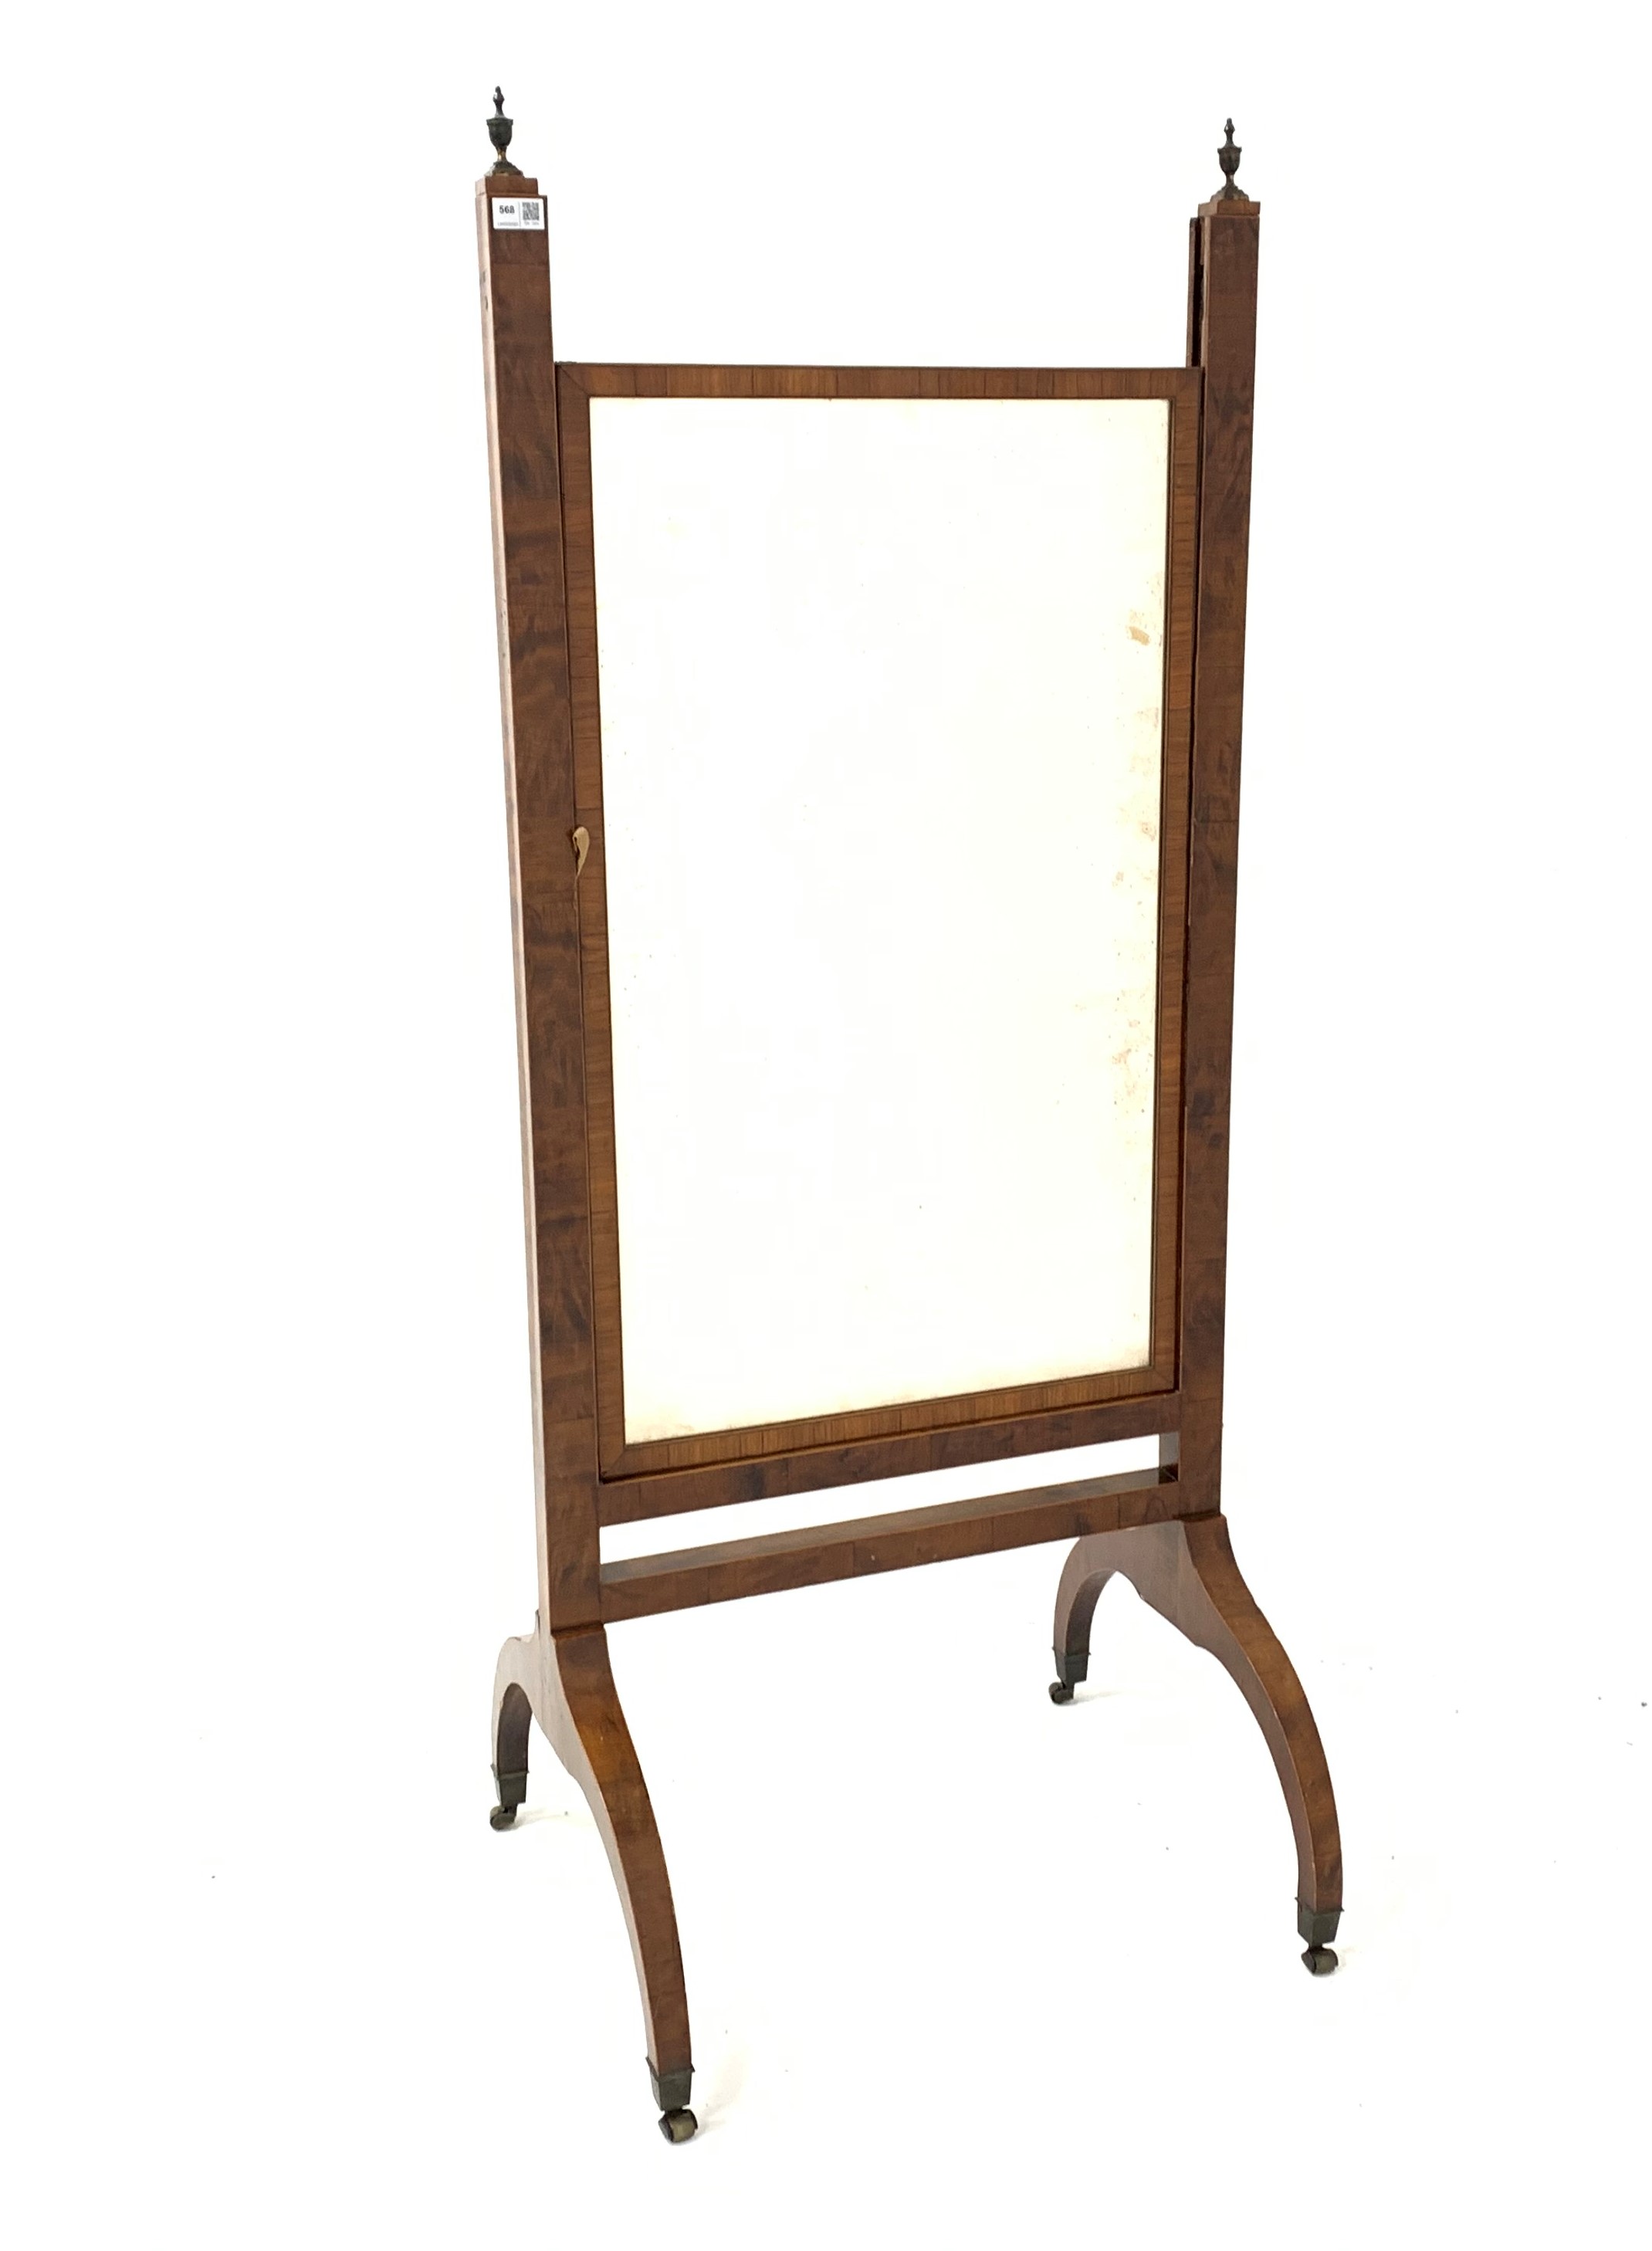 Early 20th century walnut cheval dressing mirror, with urn finials,